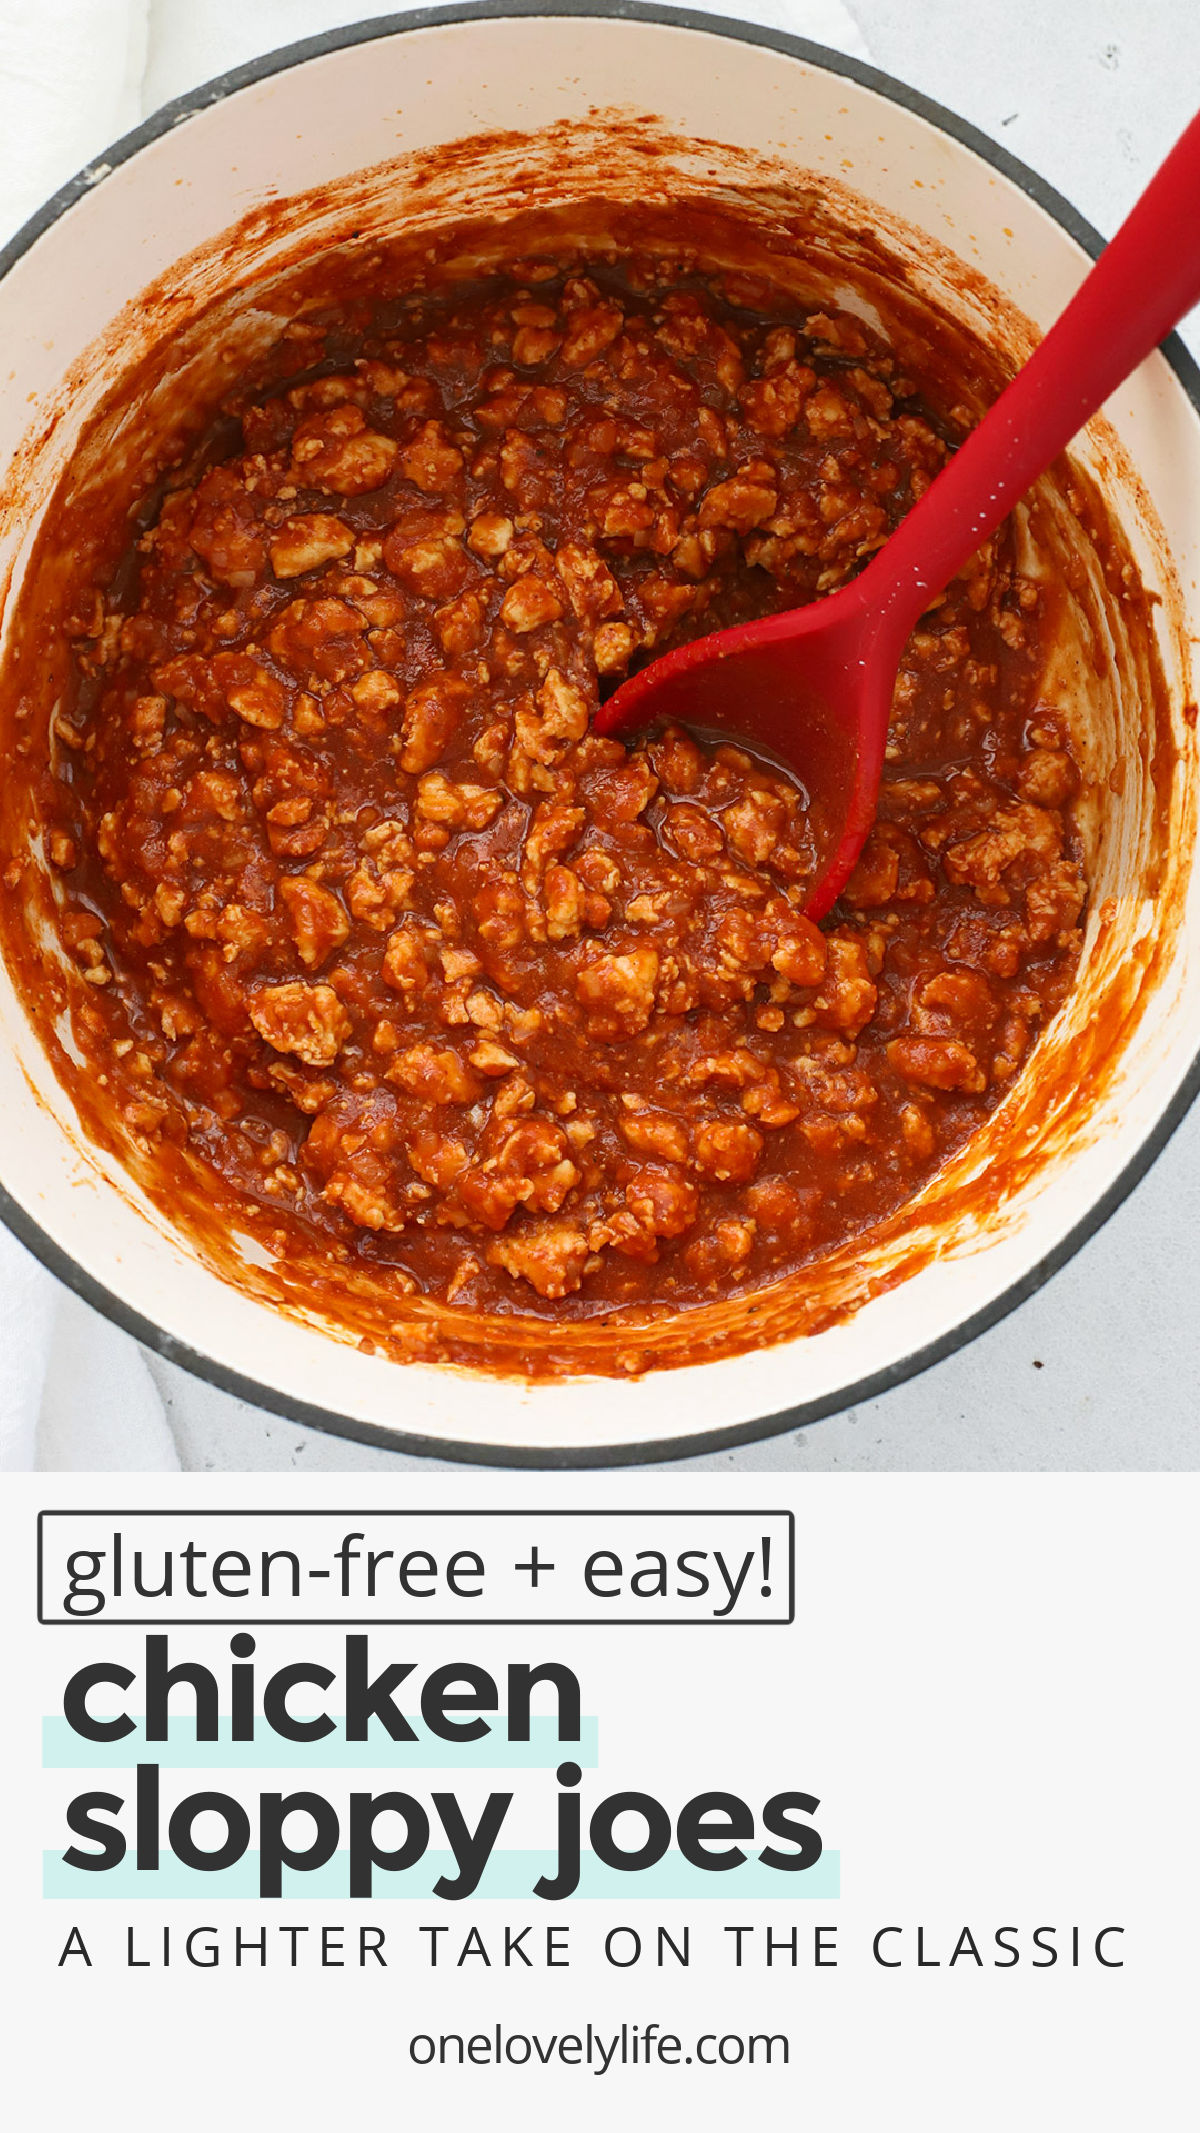 Healthy Chicken Sloppy Joes - These healthy sloppy joes are a lighter take on the classic! You'll love the savory sauce and all our favorite ways to serve them! // Healthy Sloppy Joes Recipe // Chicken Sloppy Joe Recipe // Healthy Dinner // Sloppy Joes Recipe //